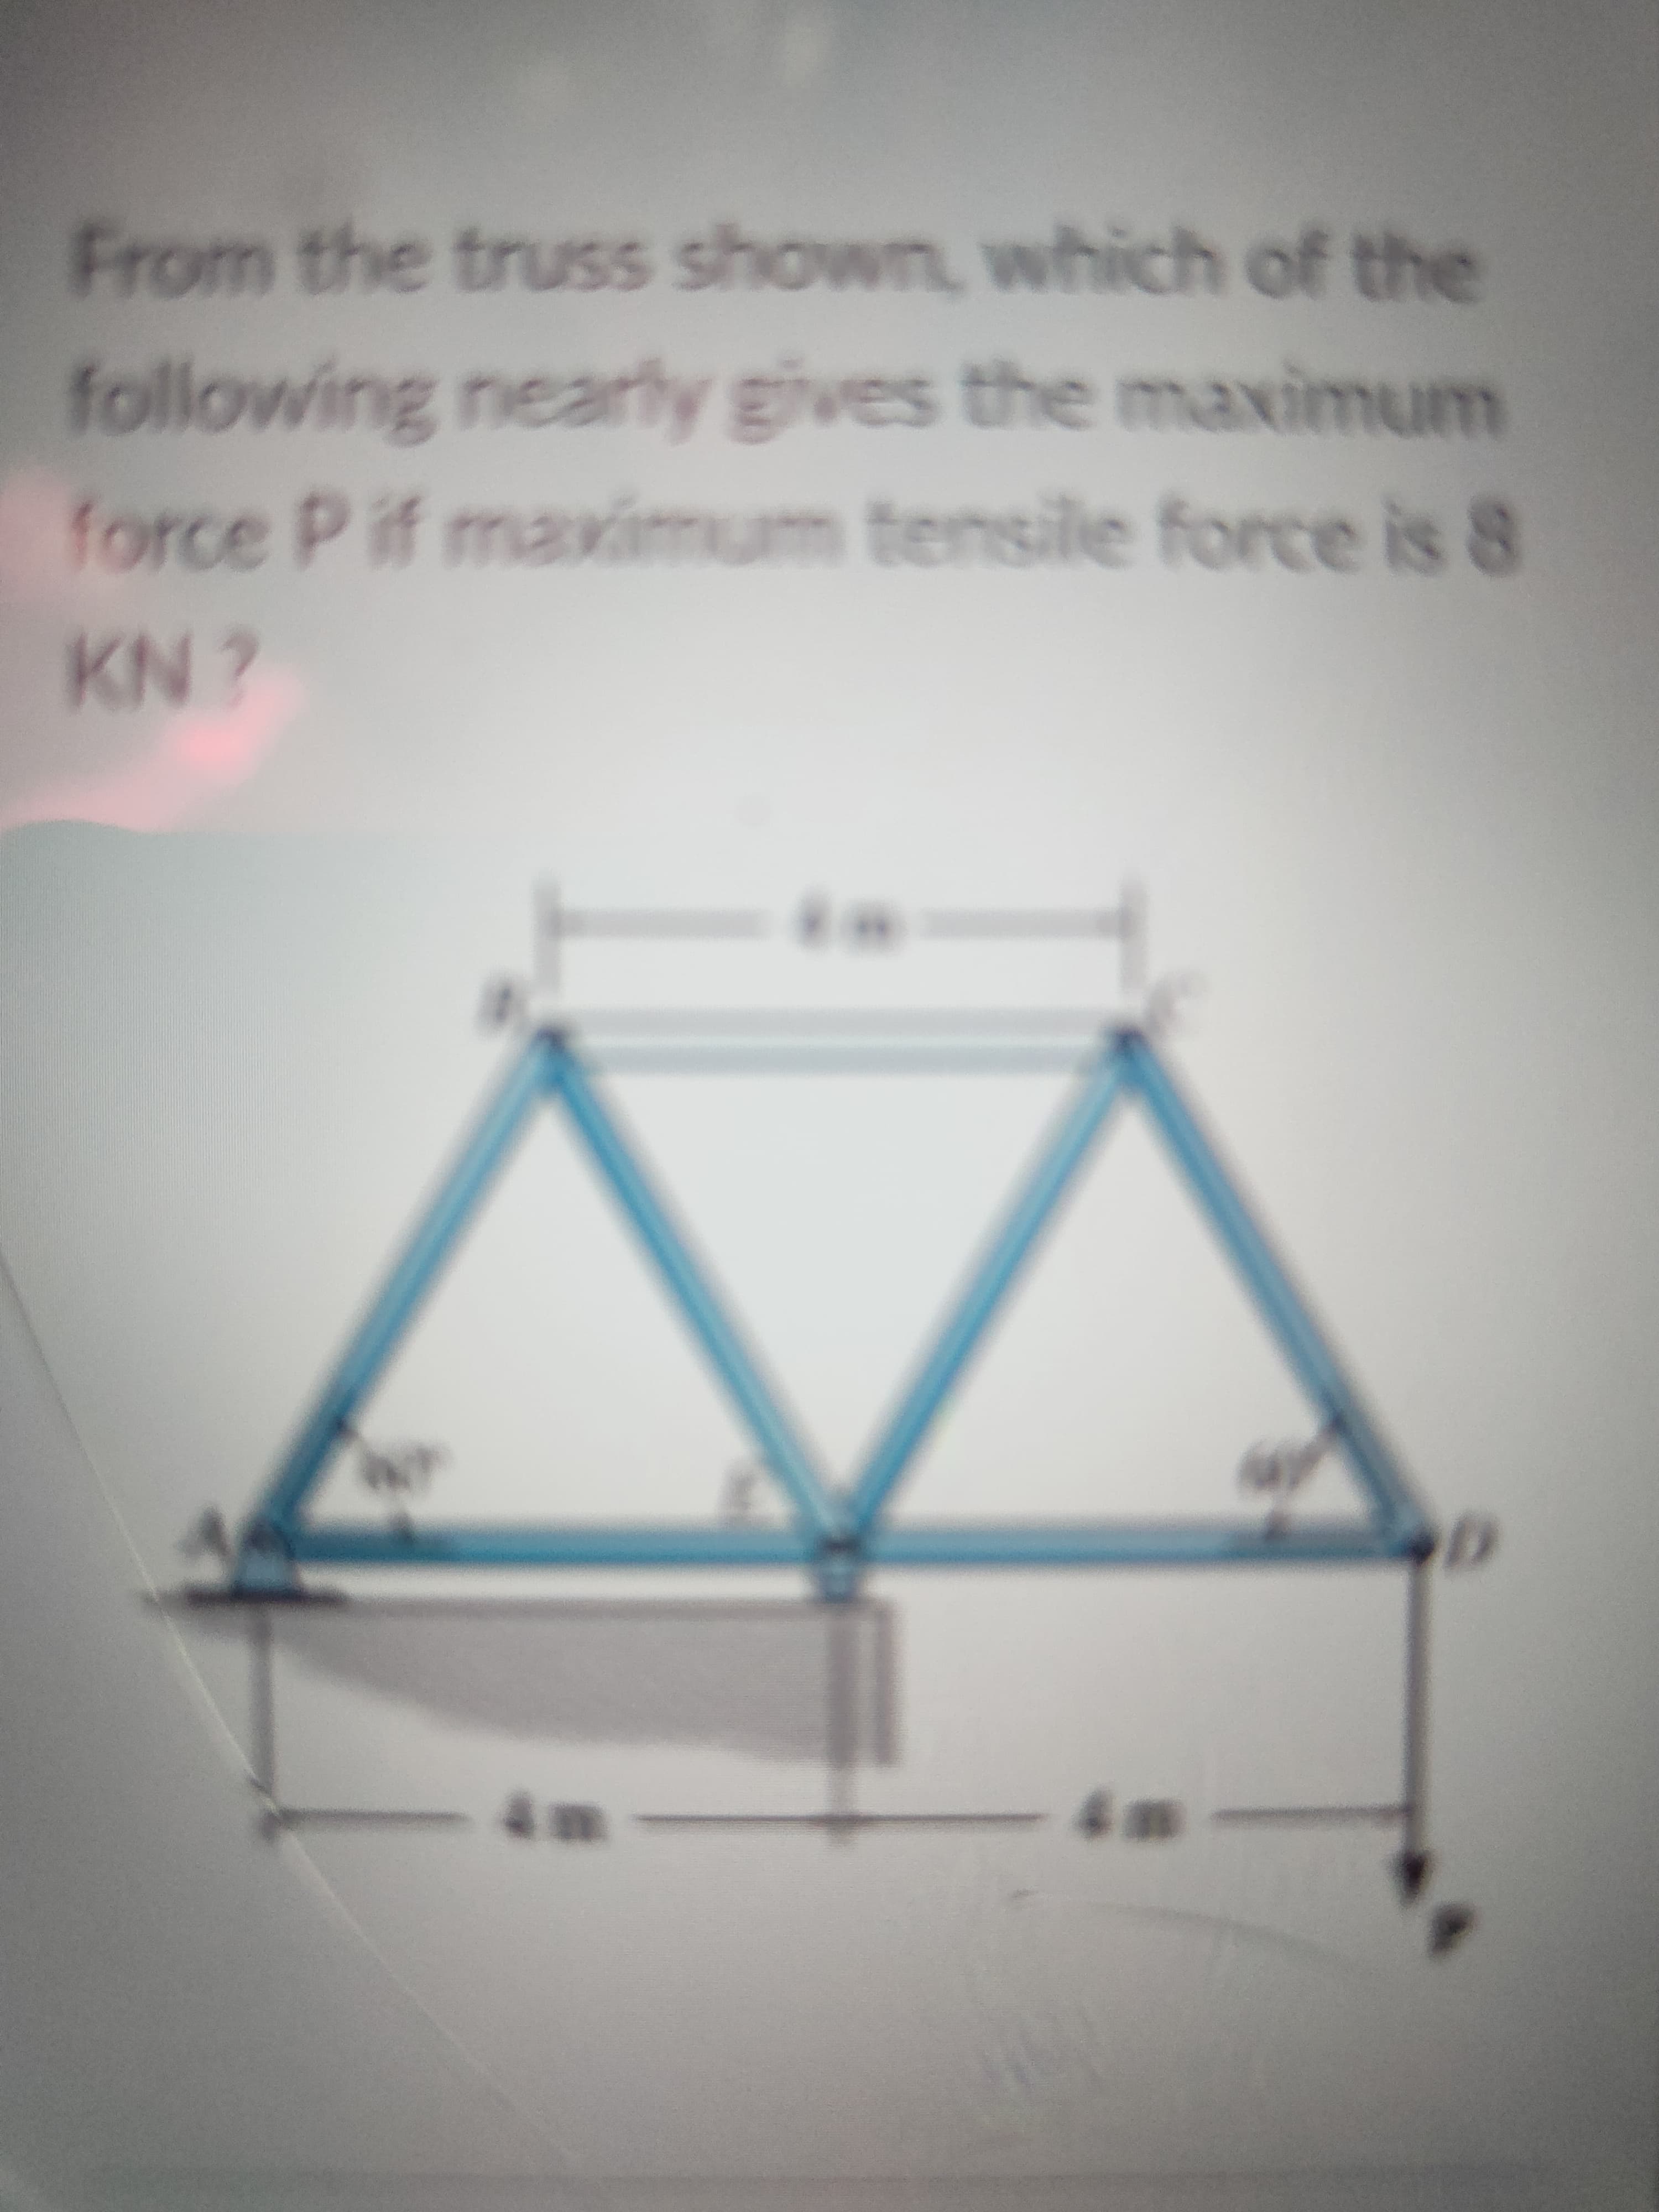 From the truss shown, which of the
following nearly gives the maximum
force P if maximum tensile force is 8
